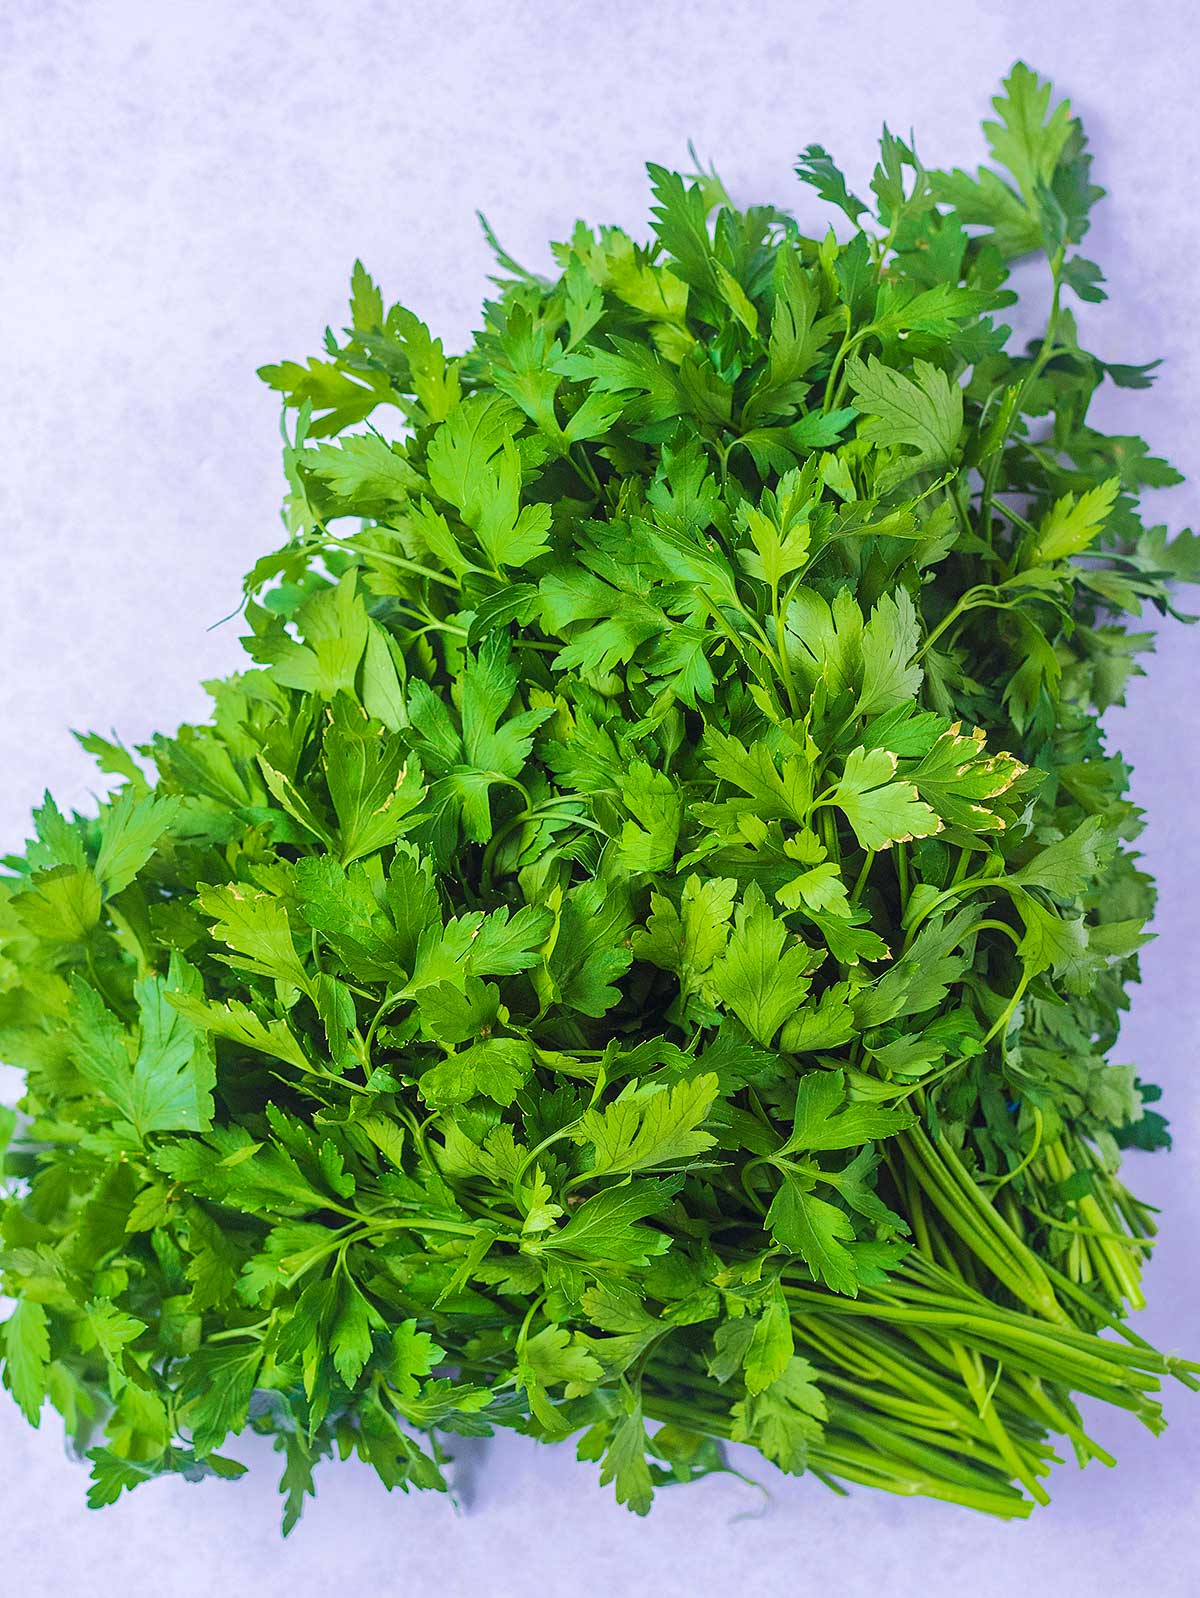 A large bunch of parsley on a grey stone surface.